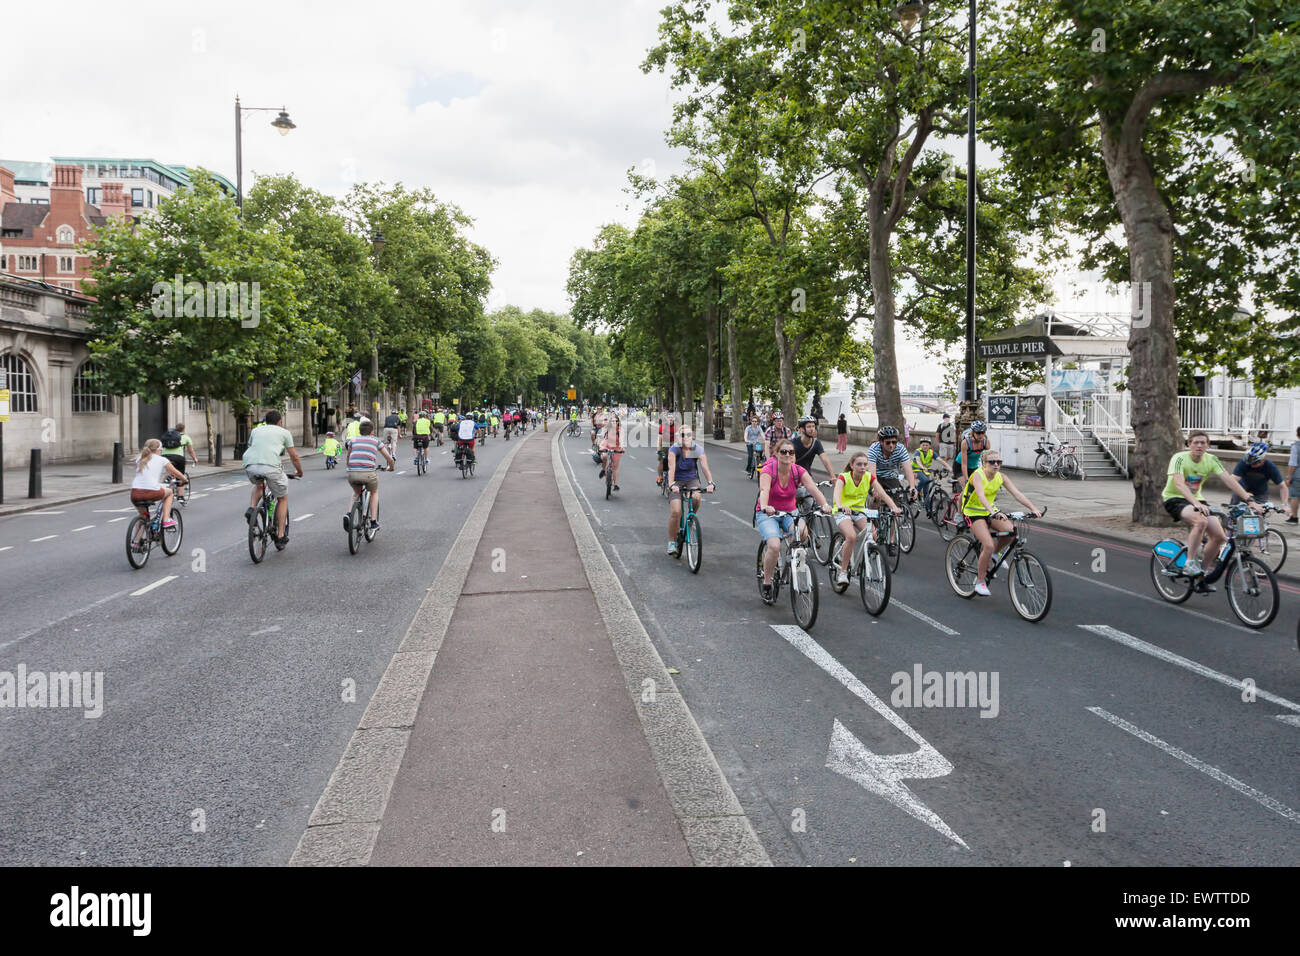 Cyclists enjoying traffic-free roads in central London during the Prudential RideLondon Freecycle 2013 Stock Photo